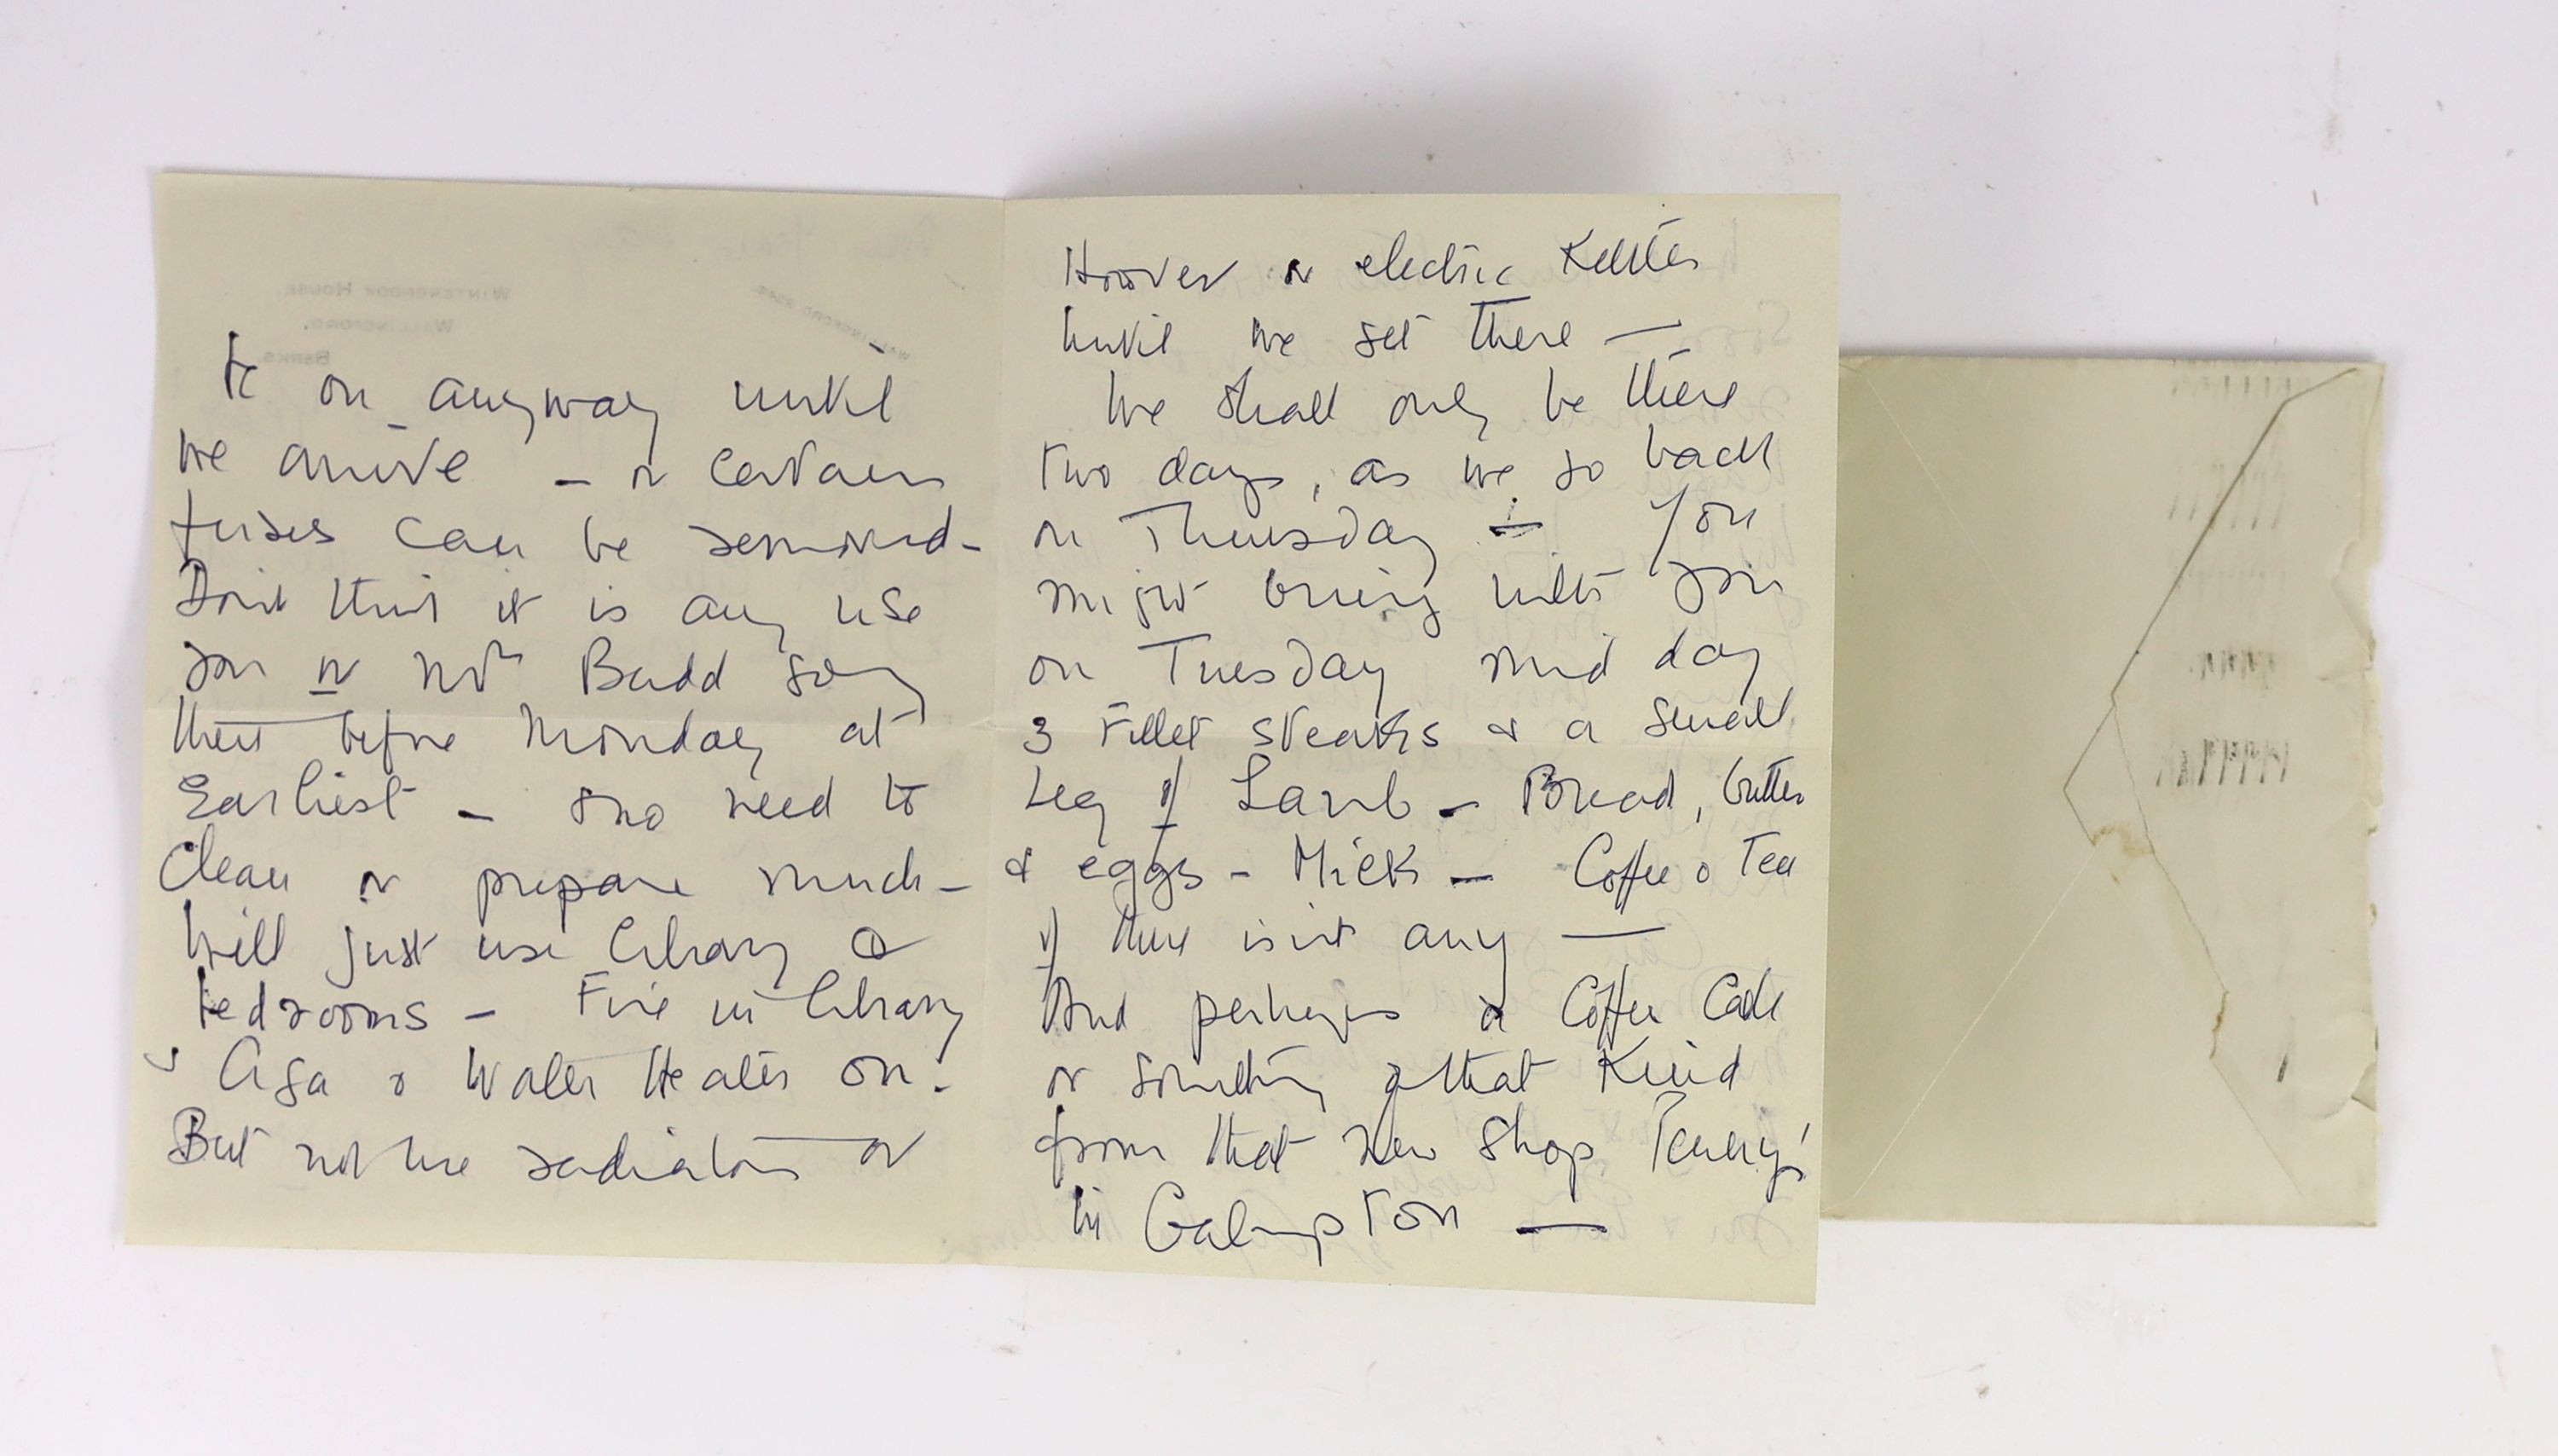 A manuscript letter to Mrs Elliot from Agatha Christie on Winterbrook House notepaper